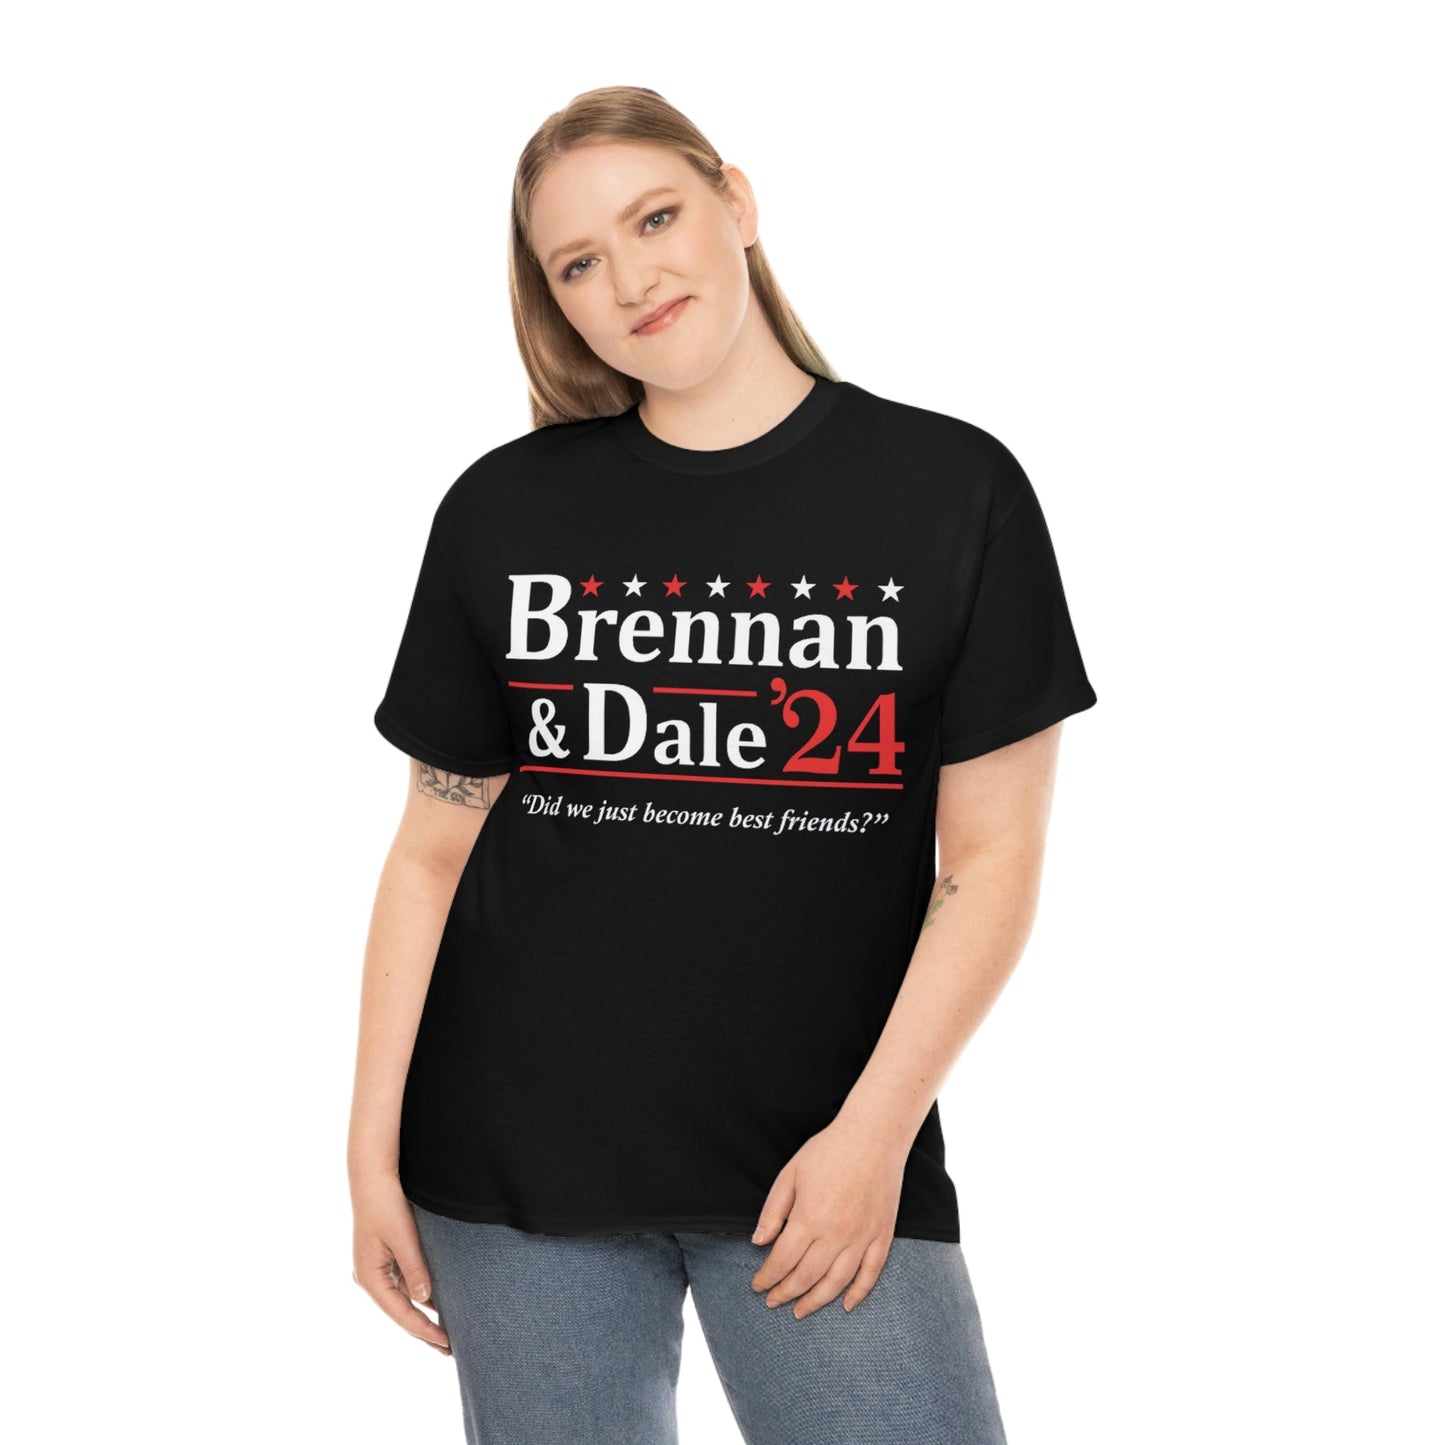 Brennan & Dale 2024 T-shirt Inspired By The Hilarious Movie Step Brothers - RetroTeeShop